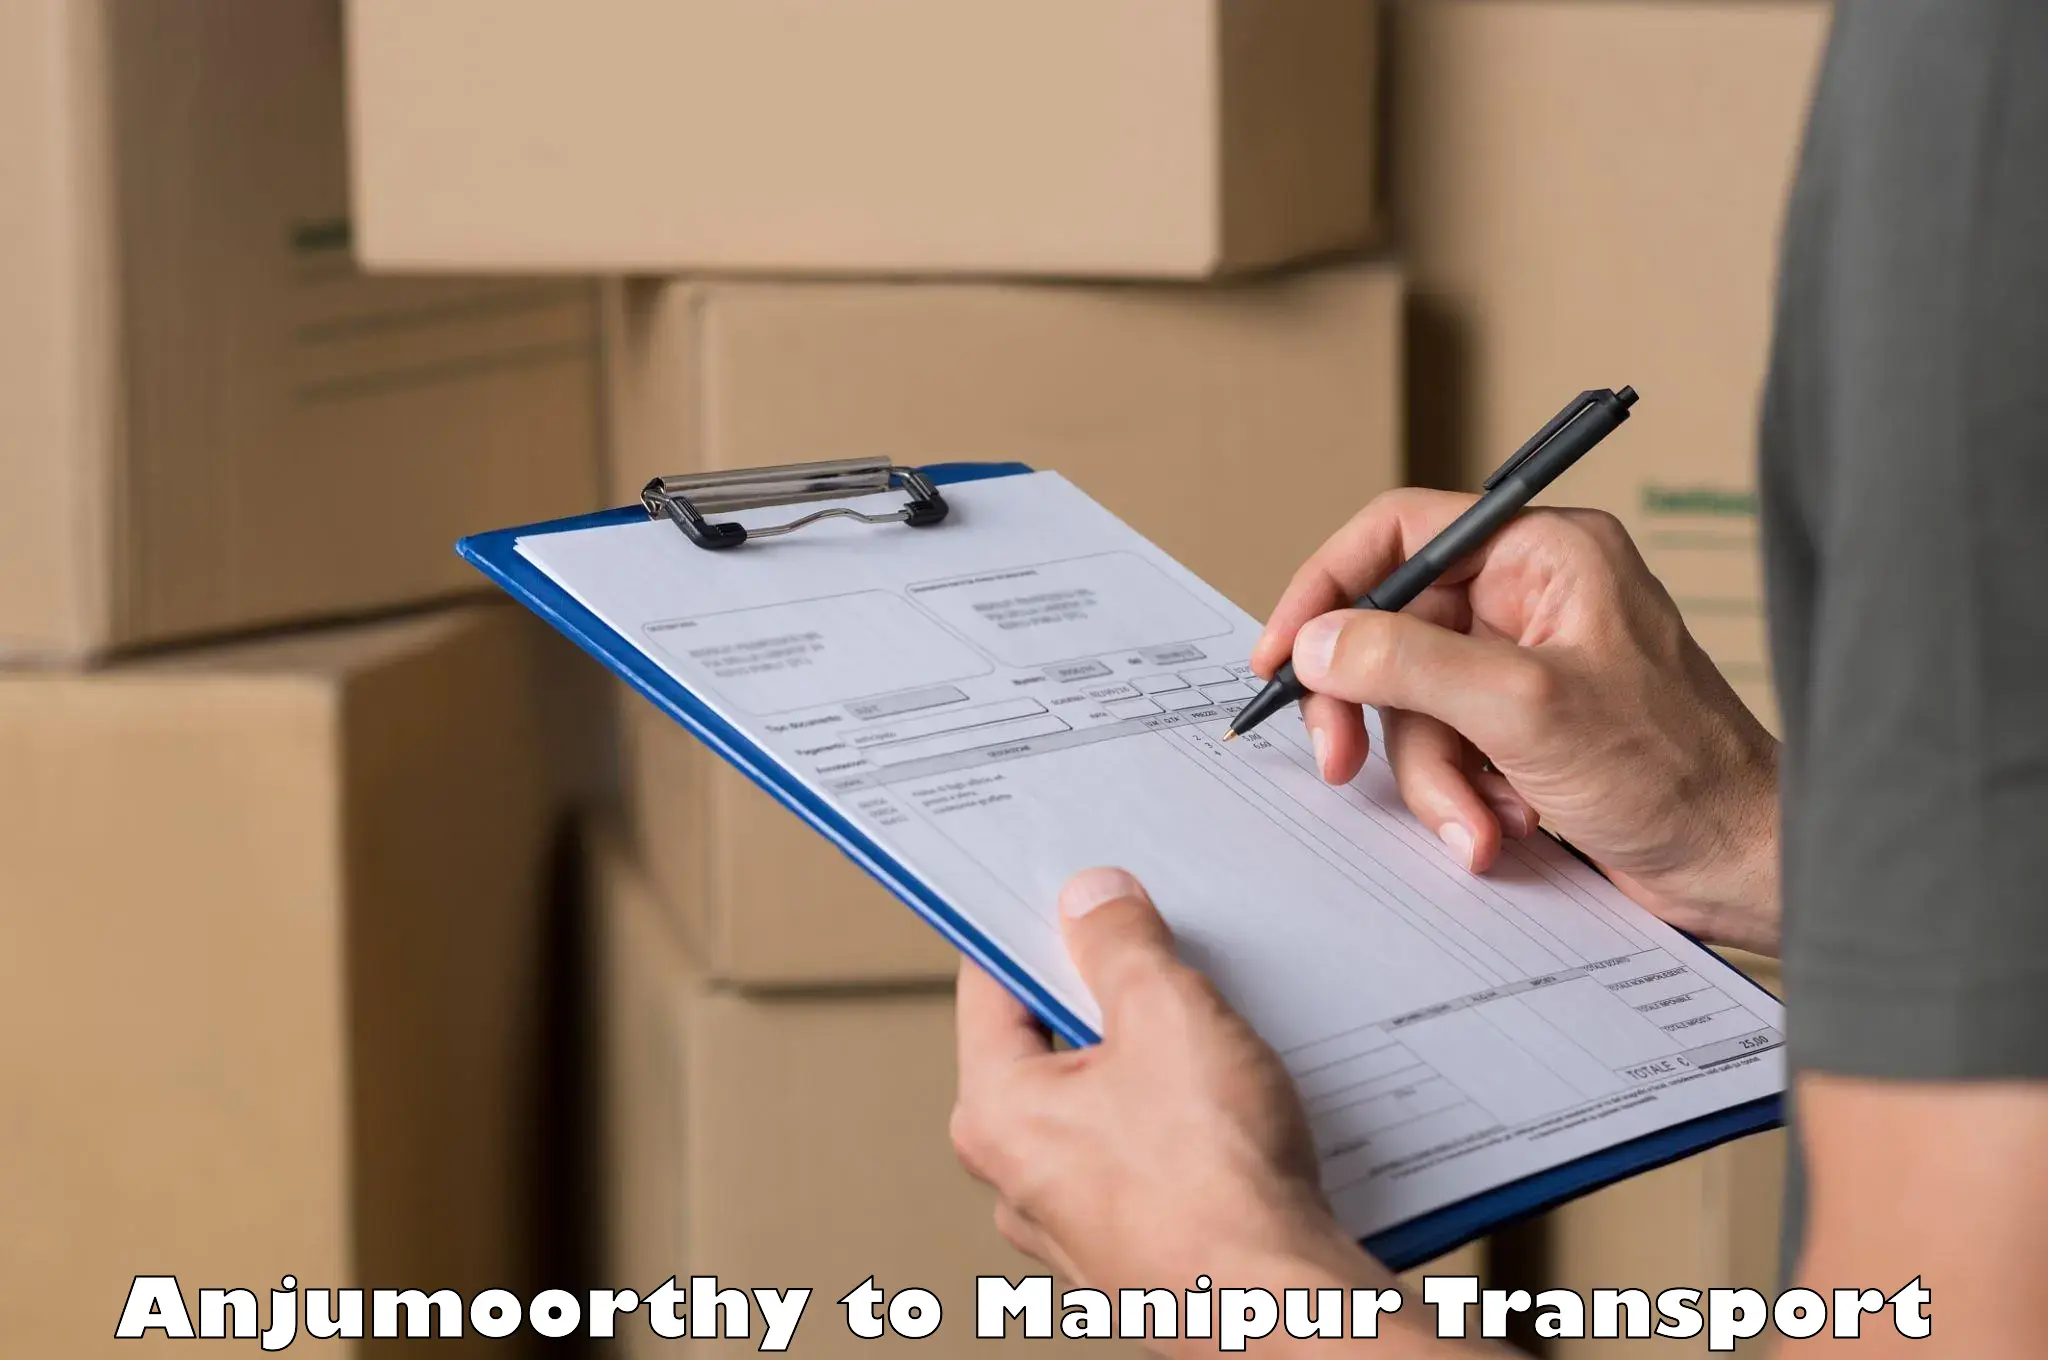 Container transportation services in Anjumoorthy to Churachandpur